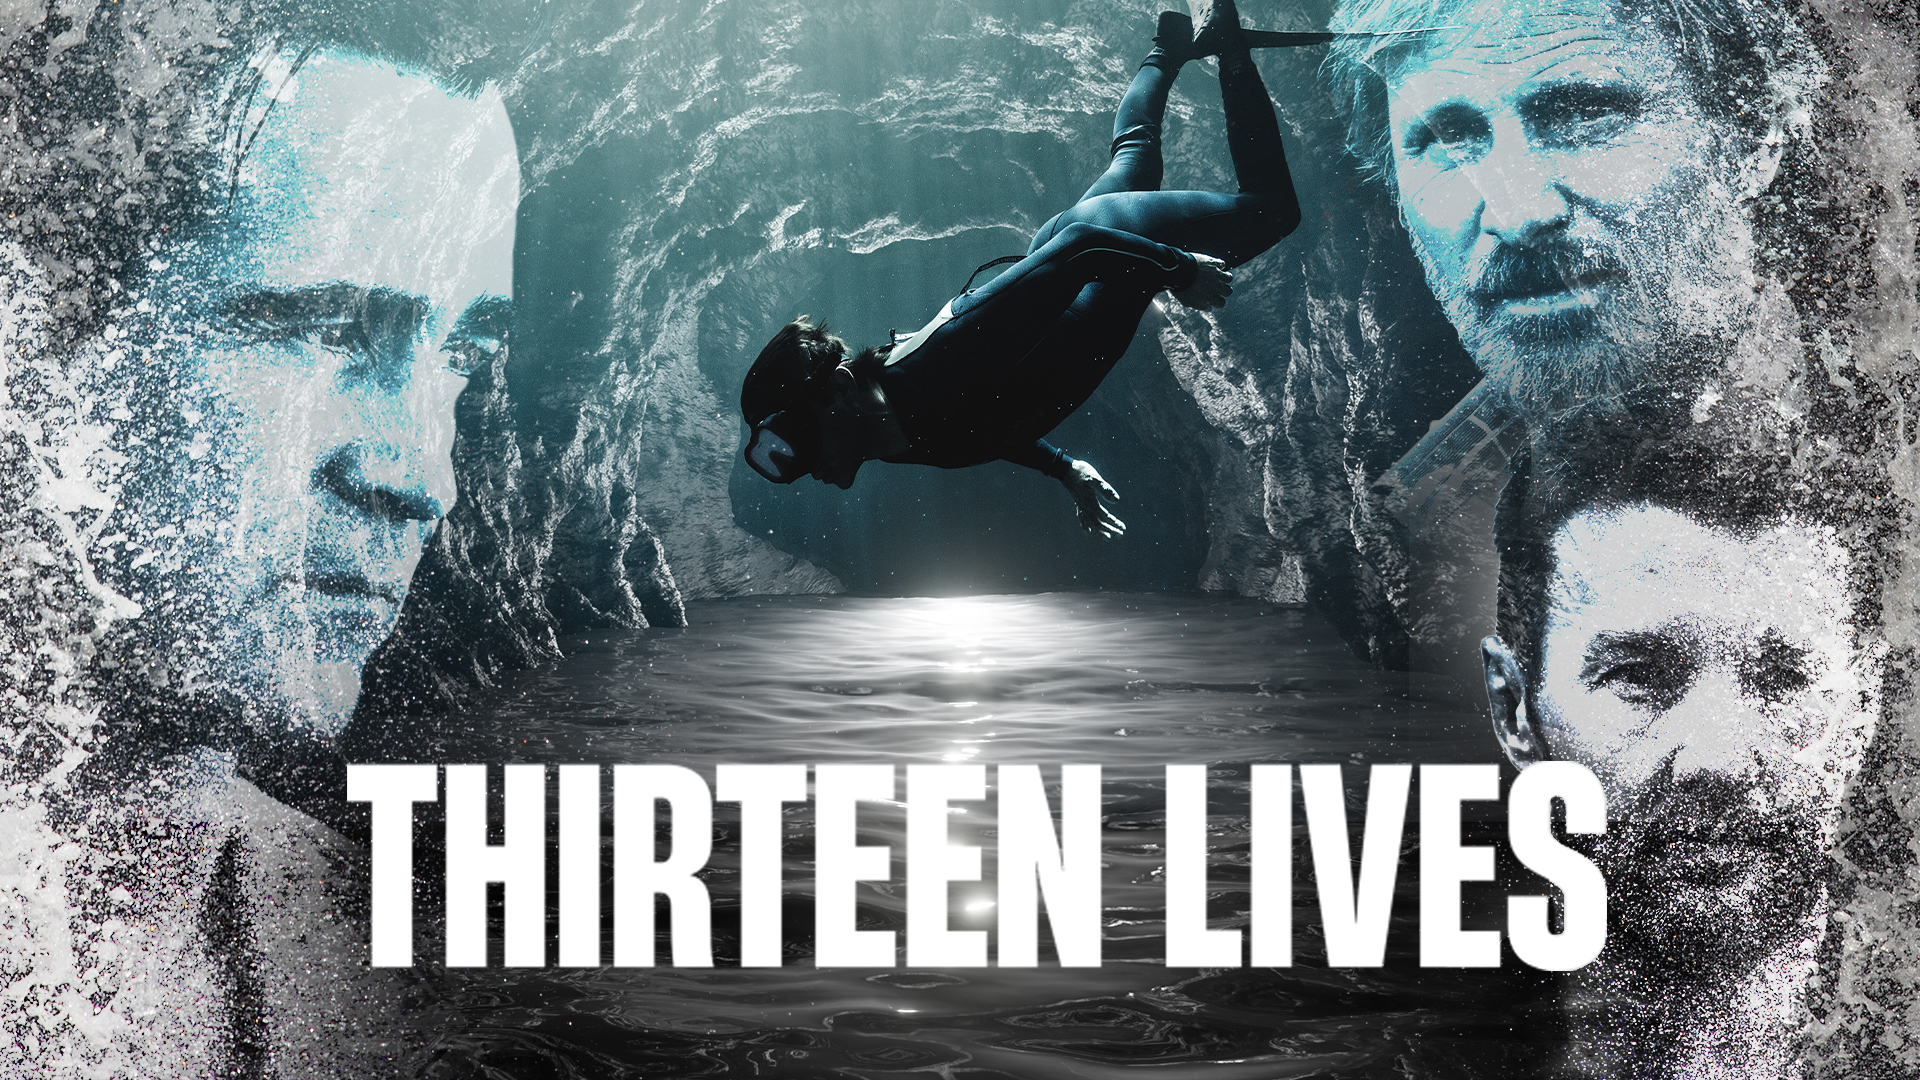 Ron Howard's 'Thirteen Lives' Masterfully Captures Heroic Thai Cave Rescue. The Daily Wire